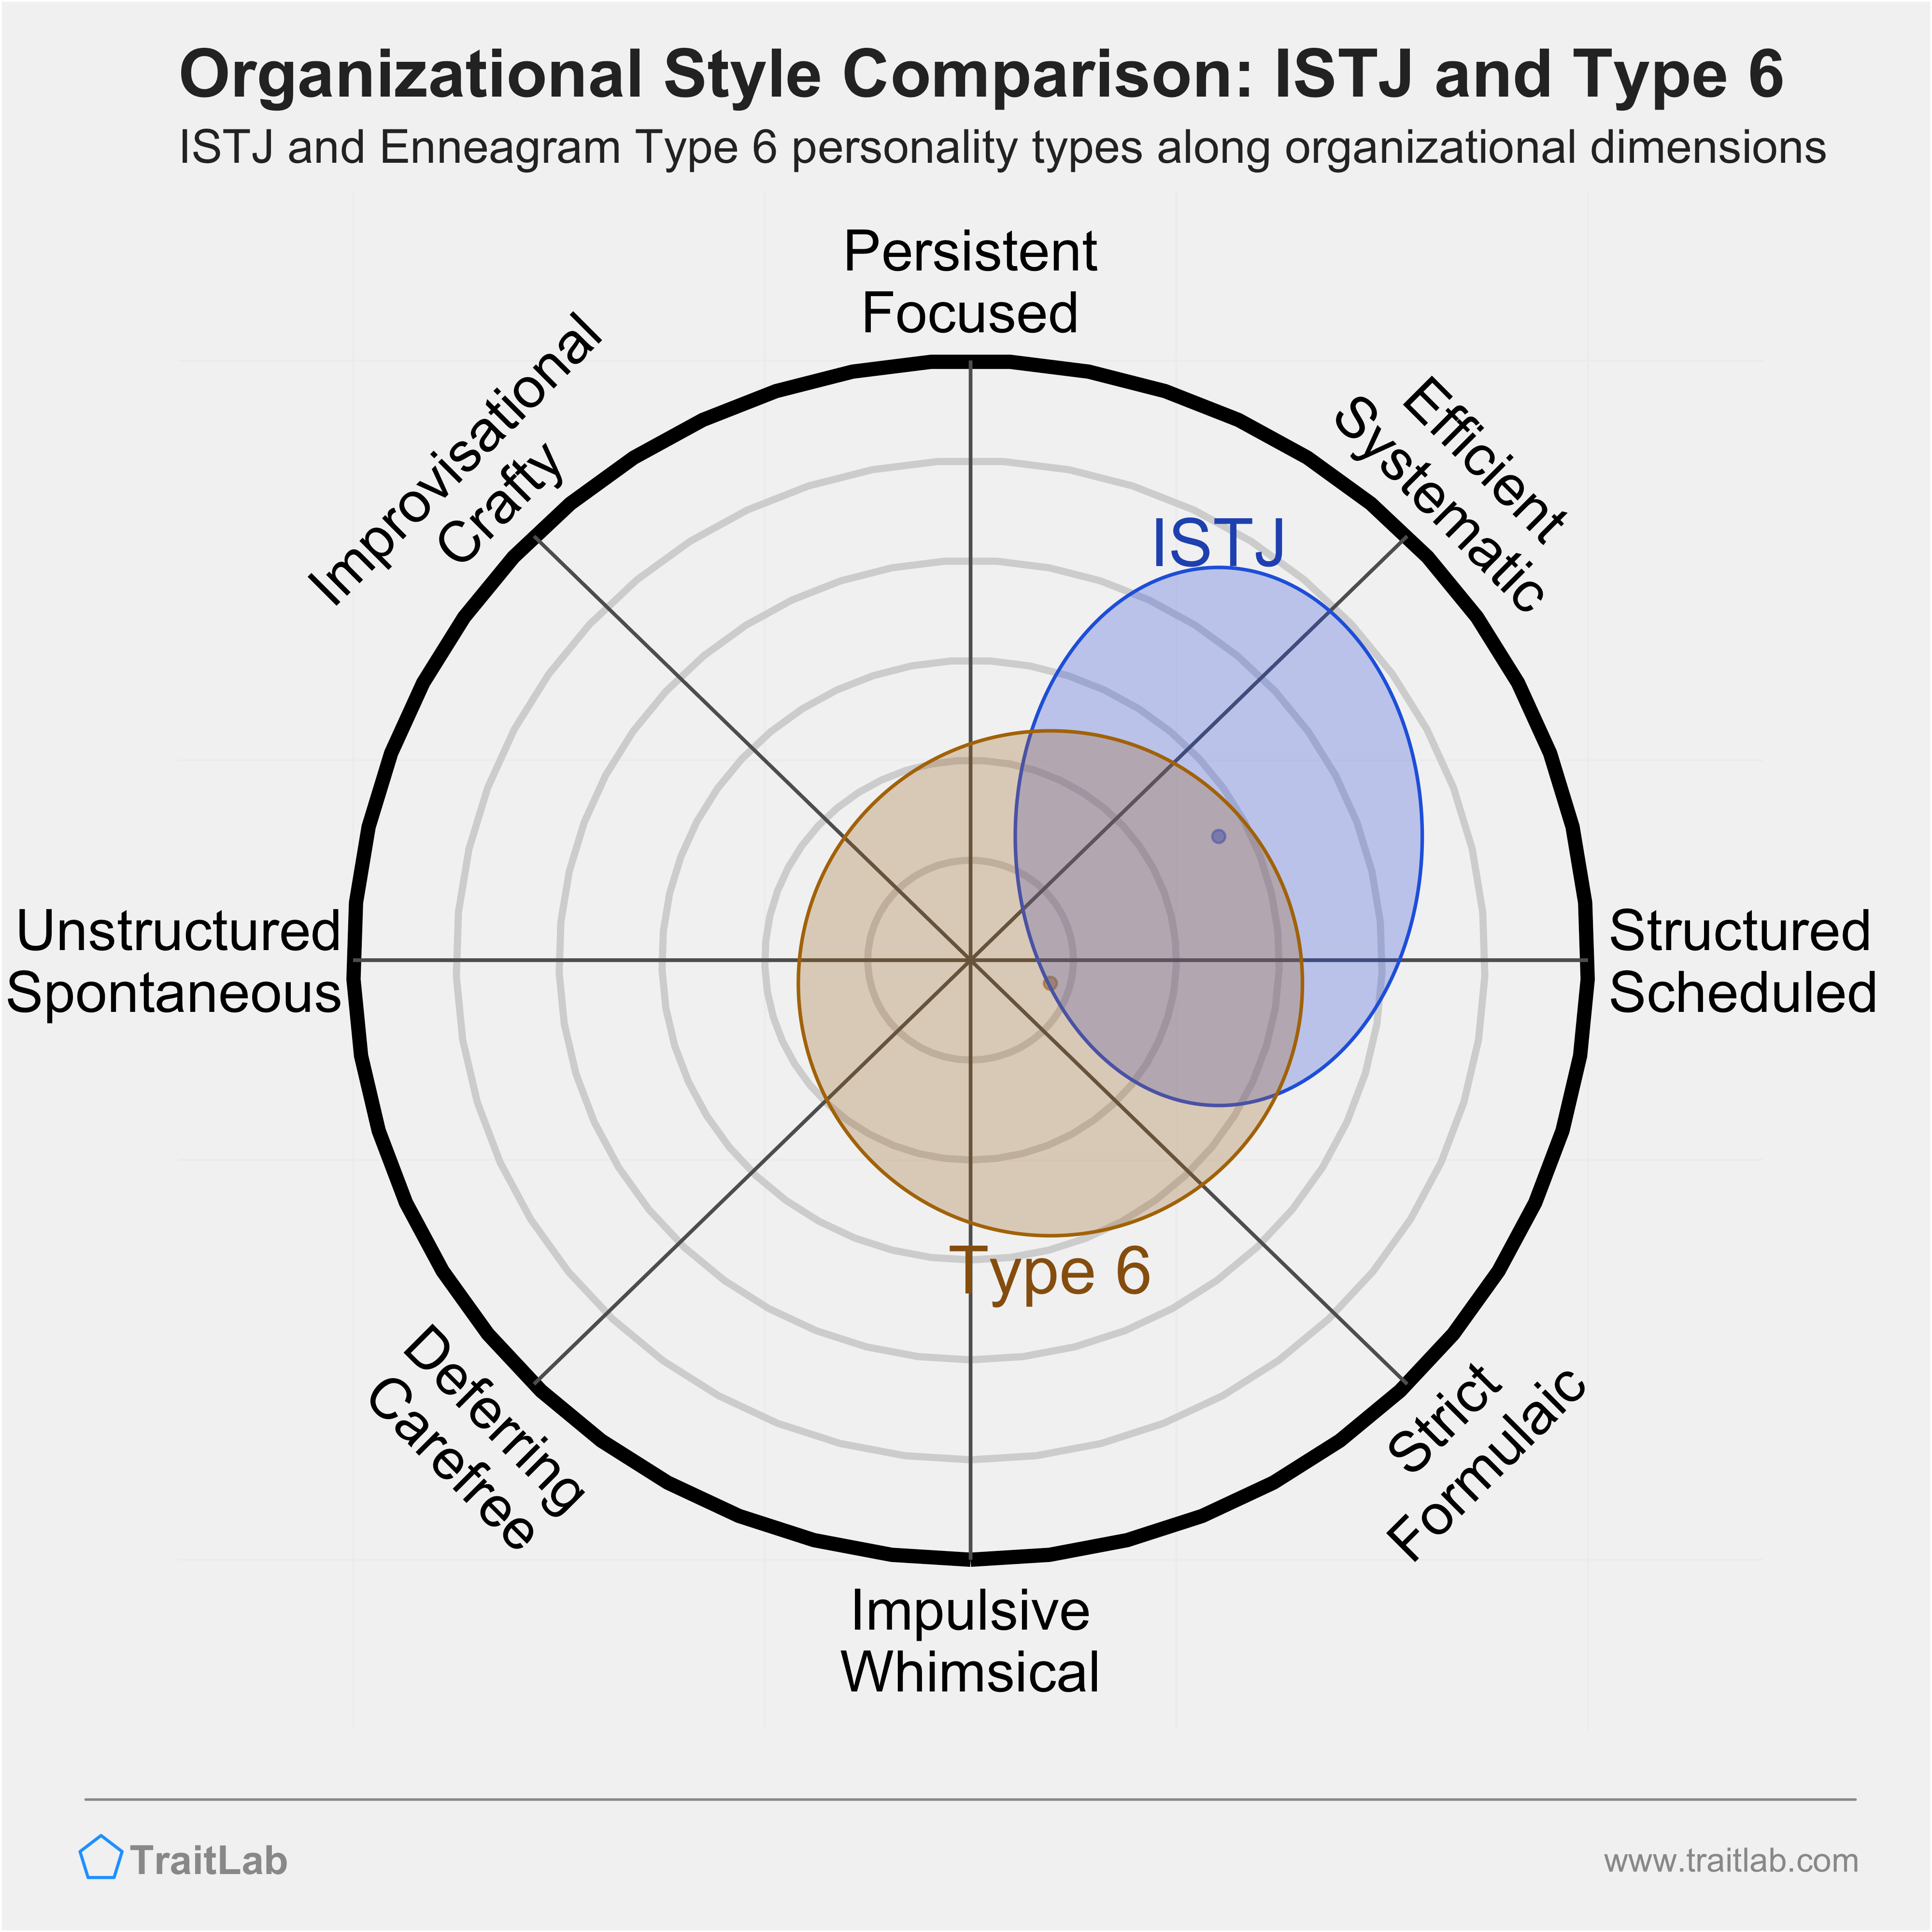 ISTJ and Type 6 comparison across organizational dimensions